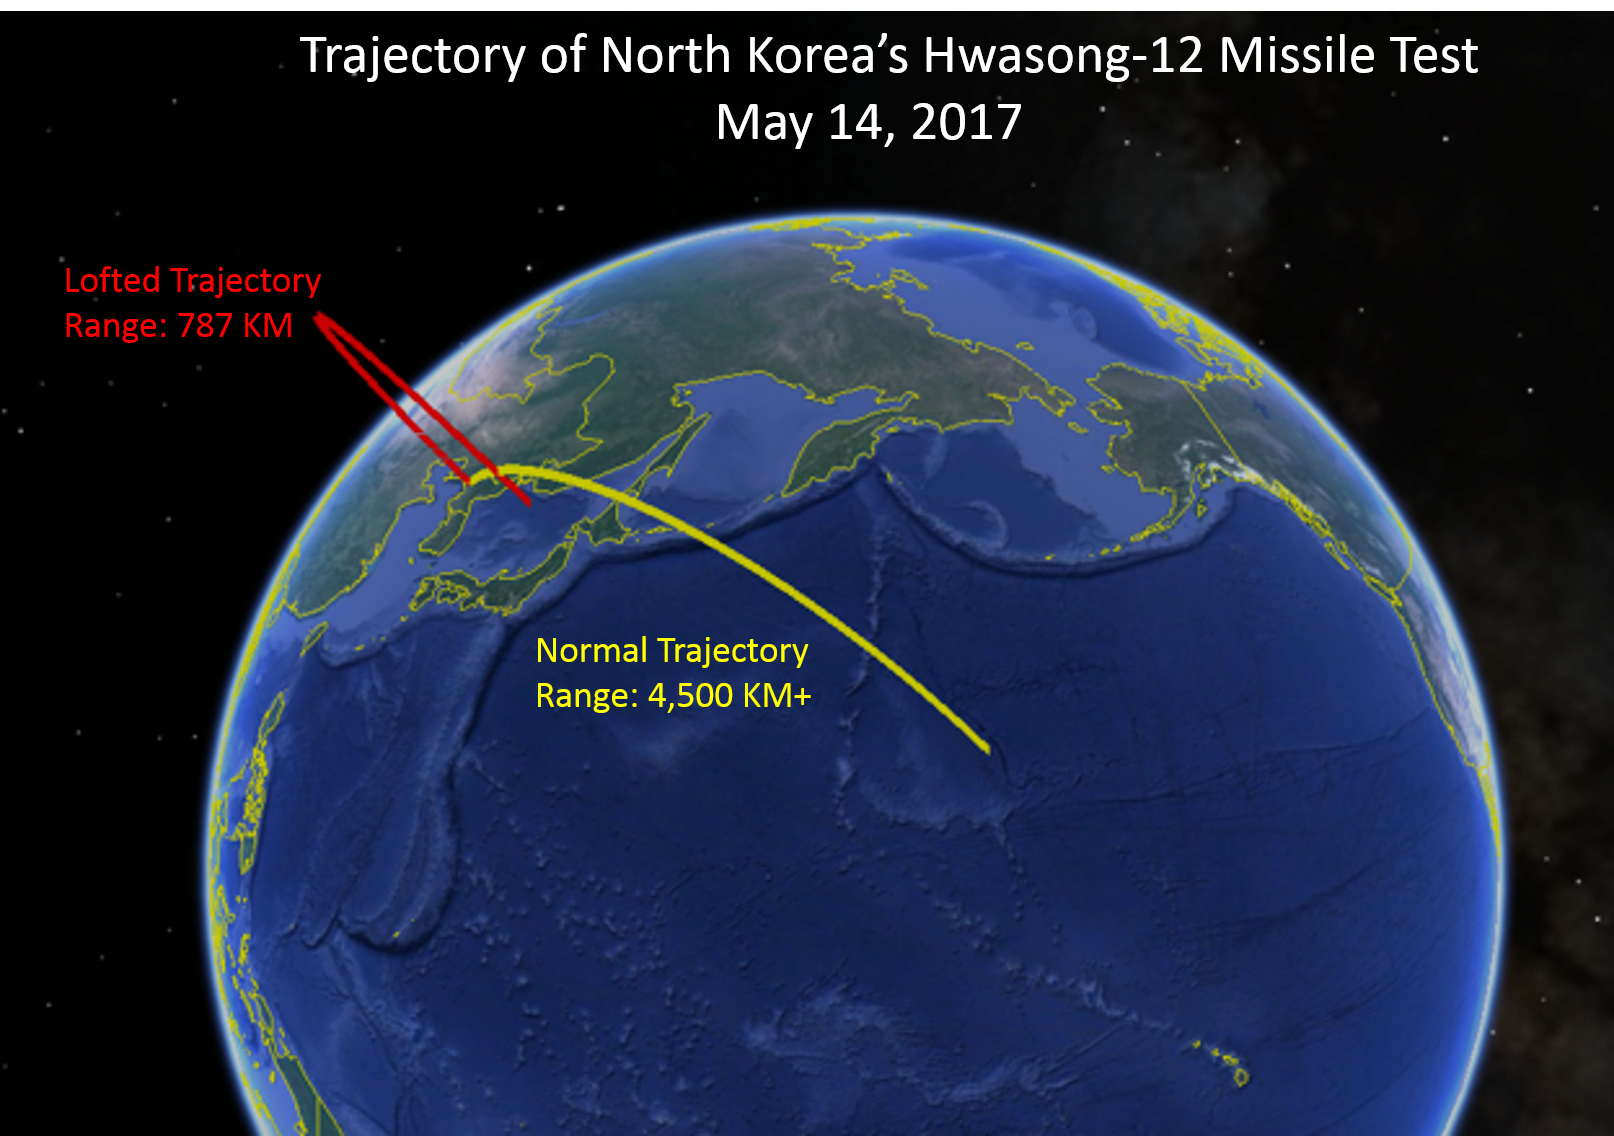 North Korea's Hwasong-12 Missile: Stepping Stone to an ICBM - The Nuclear Threat Initiative